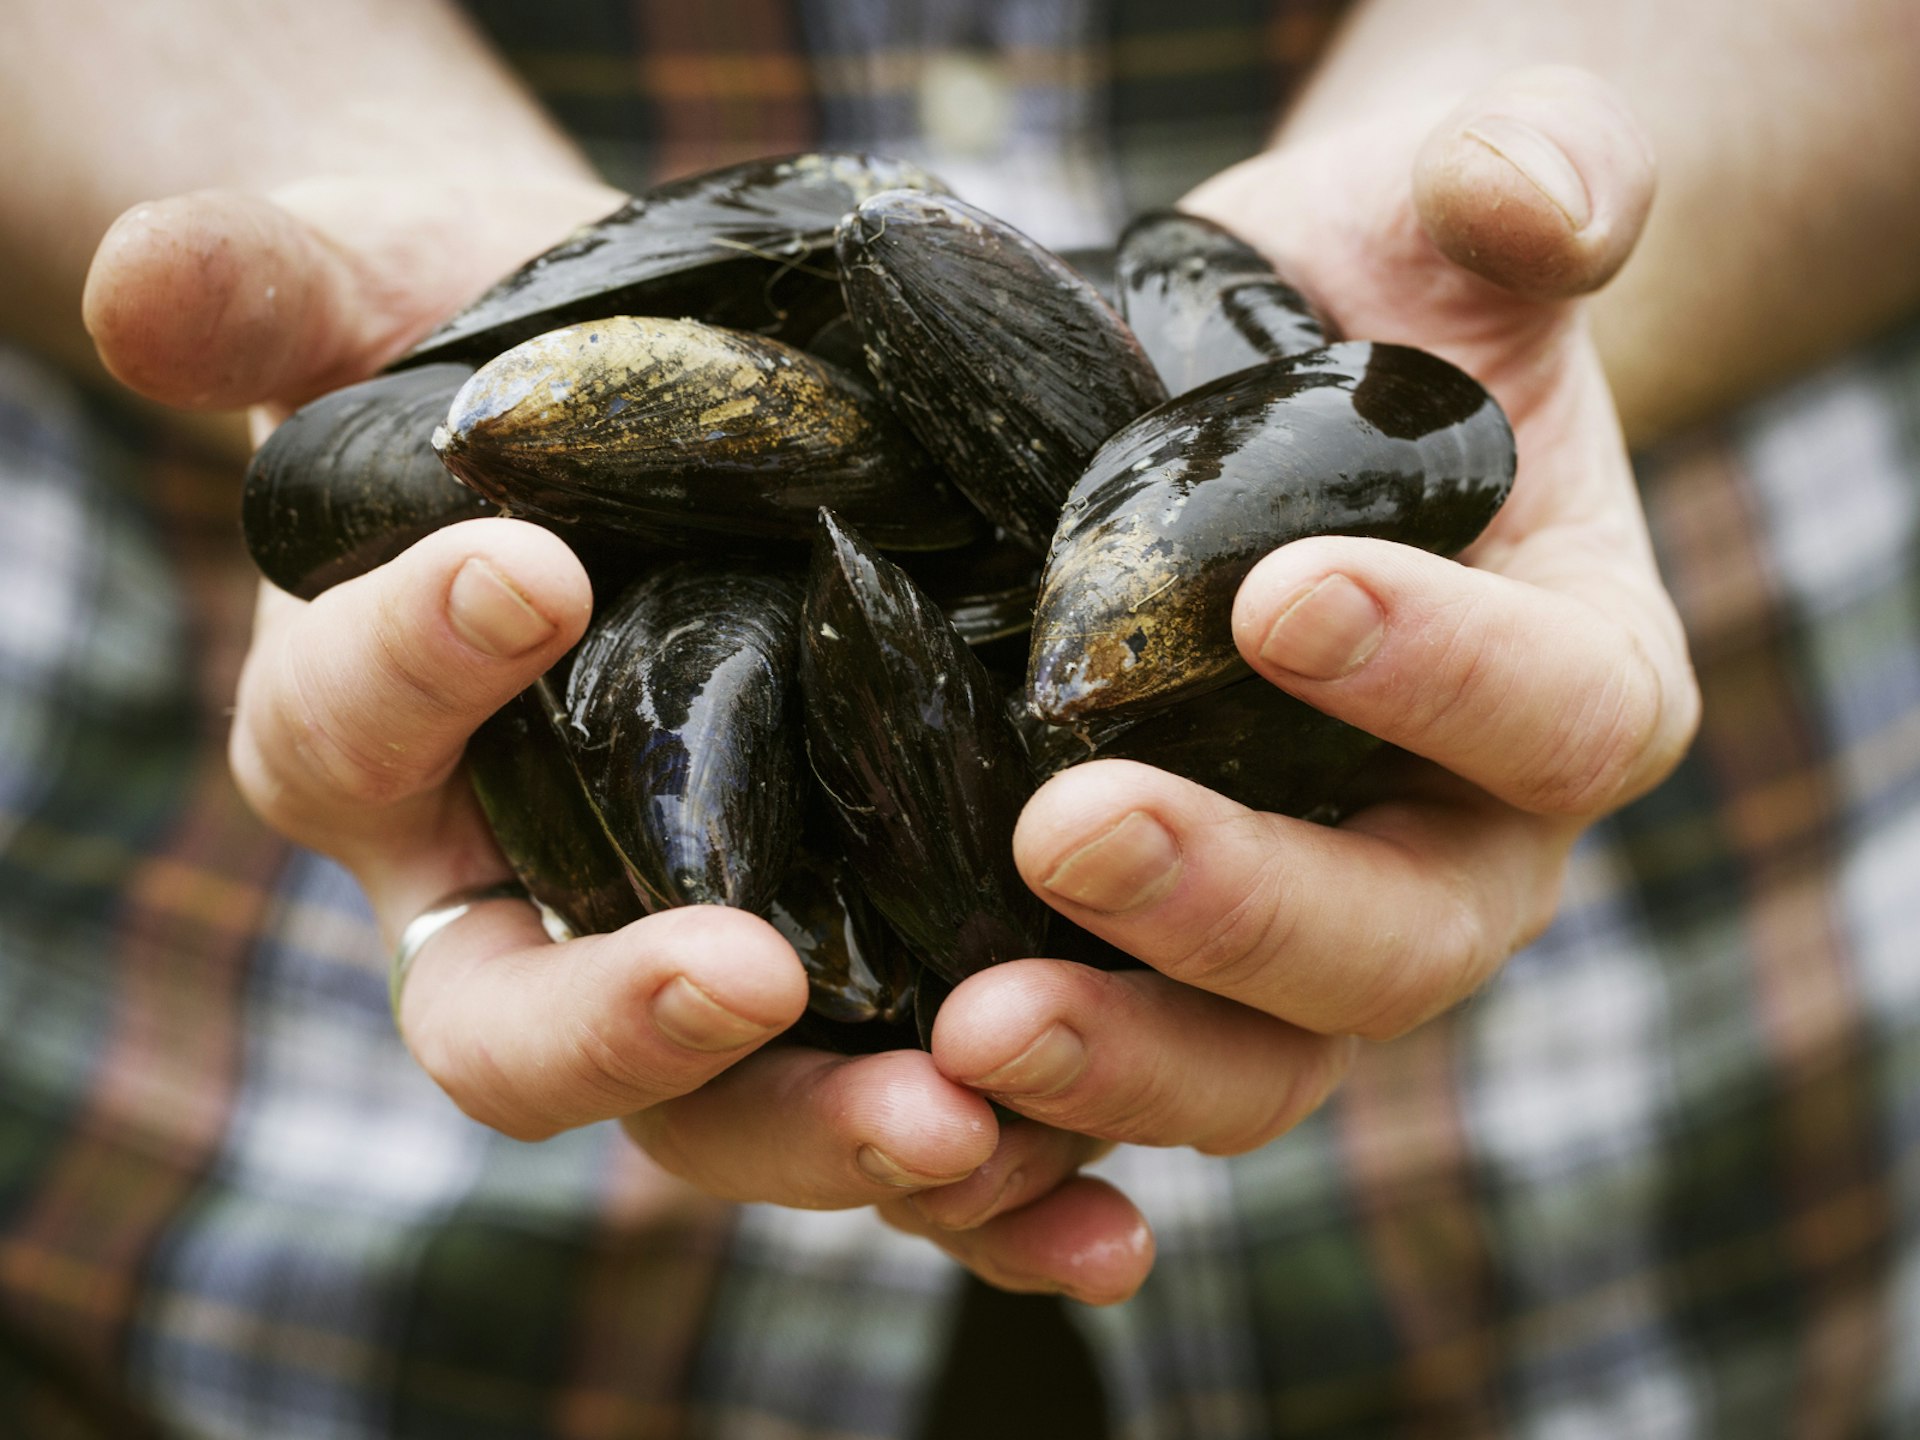 A close-up of a chef's hand holding some black mussels